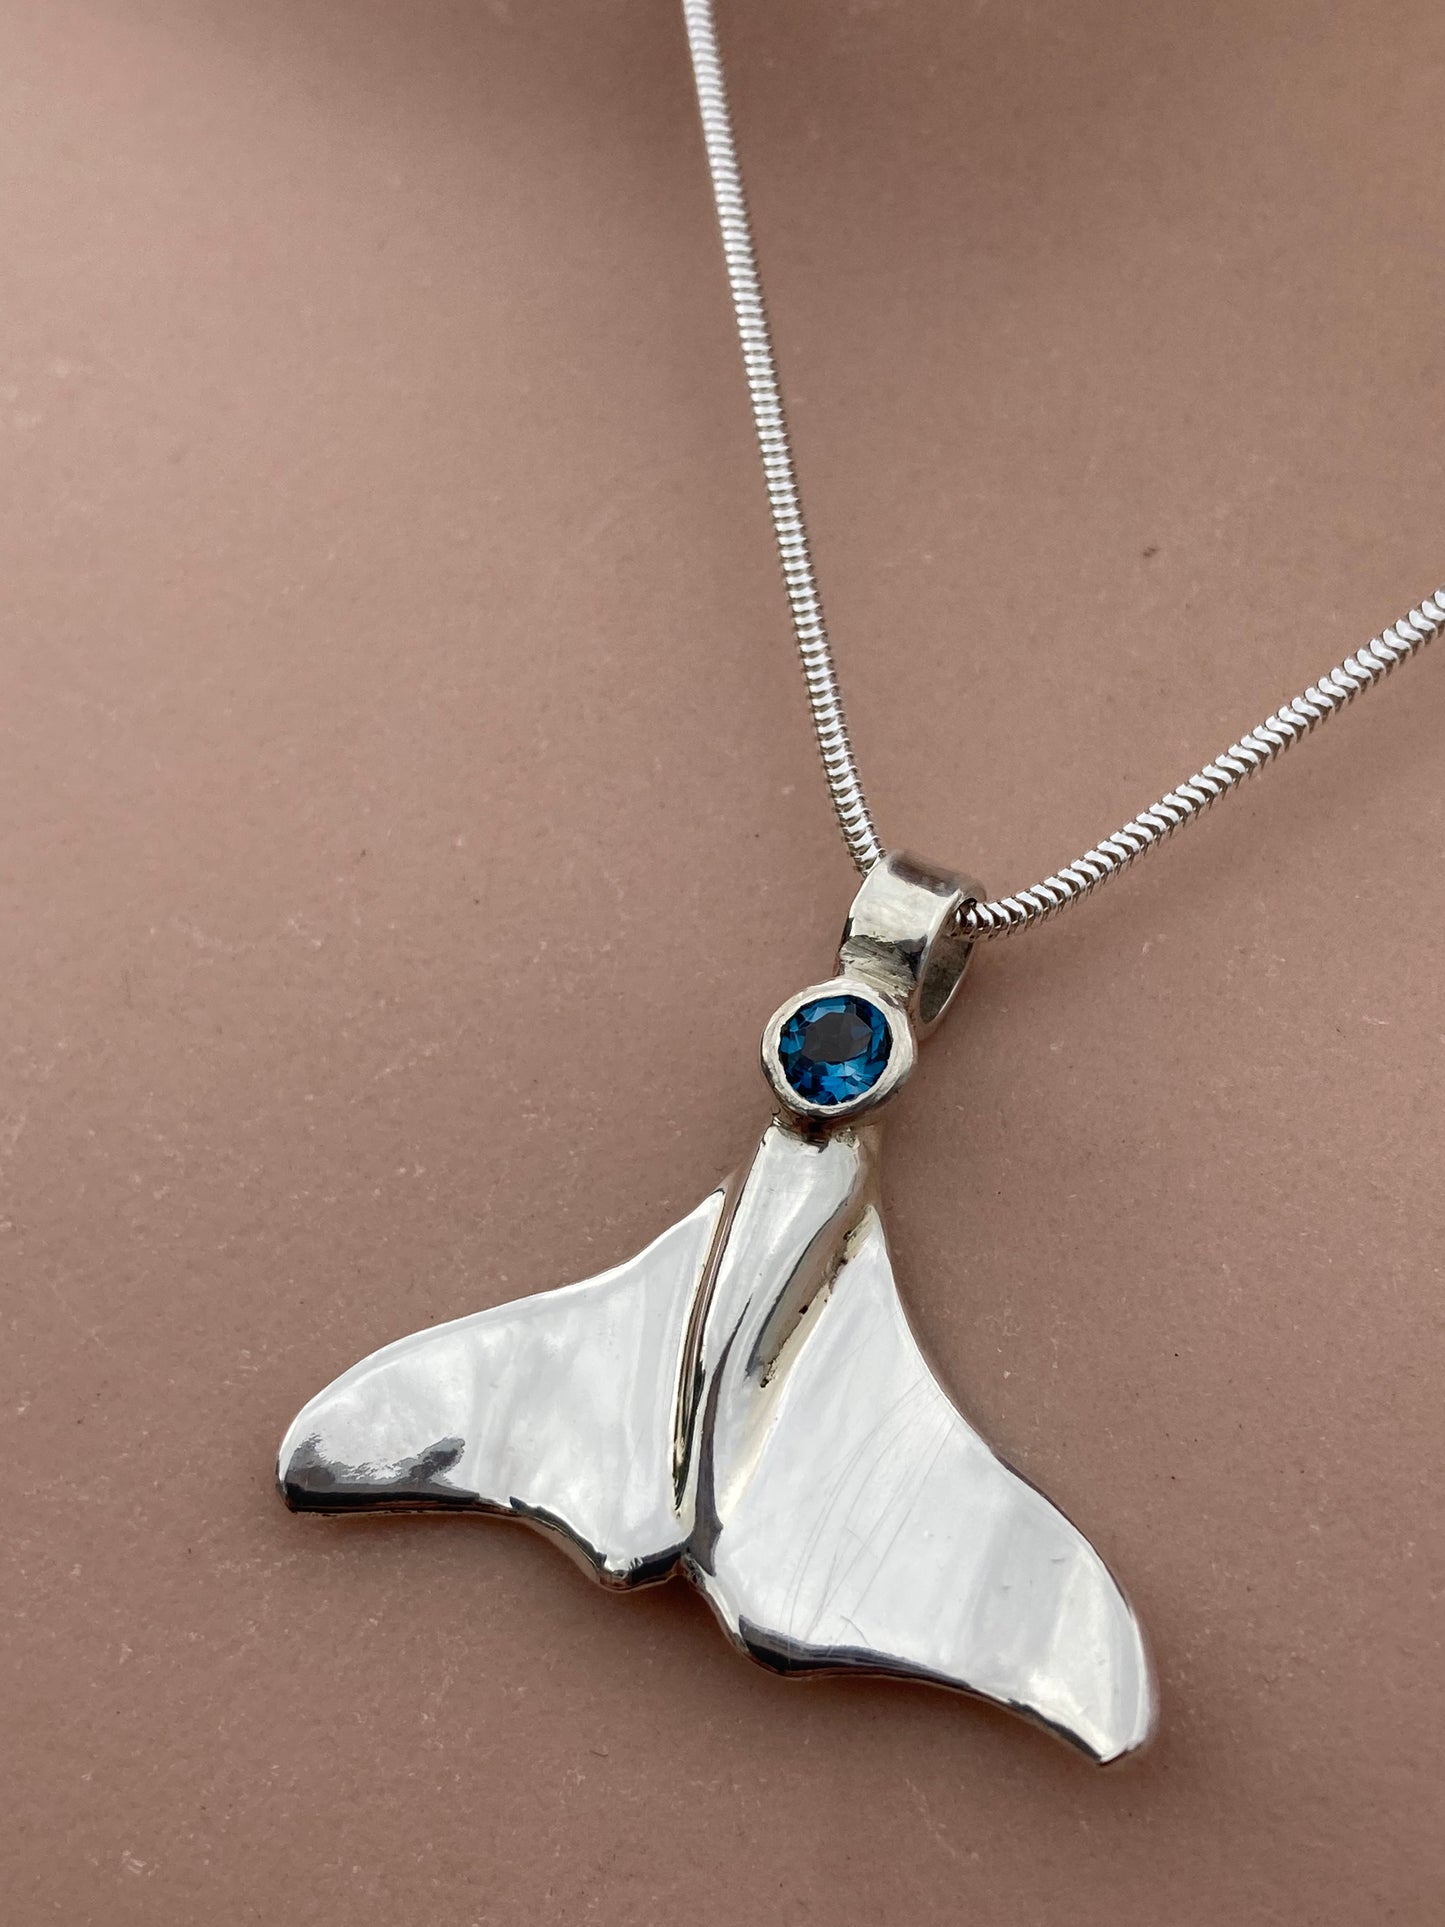 Whale tail necklace with gemstone